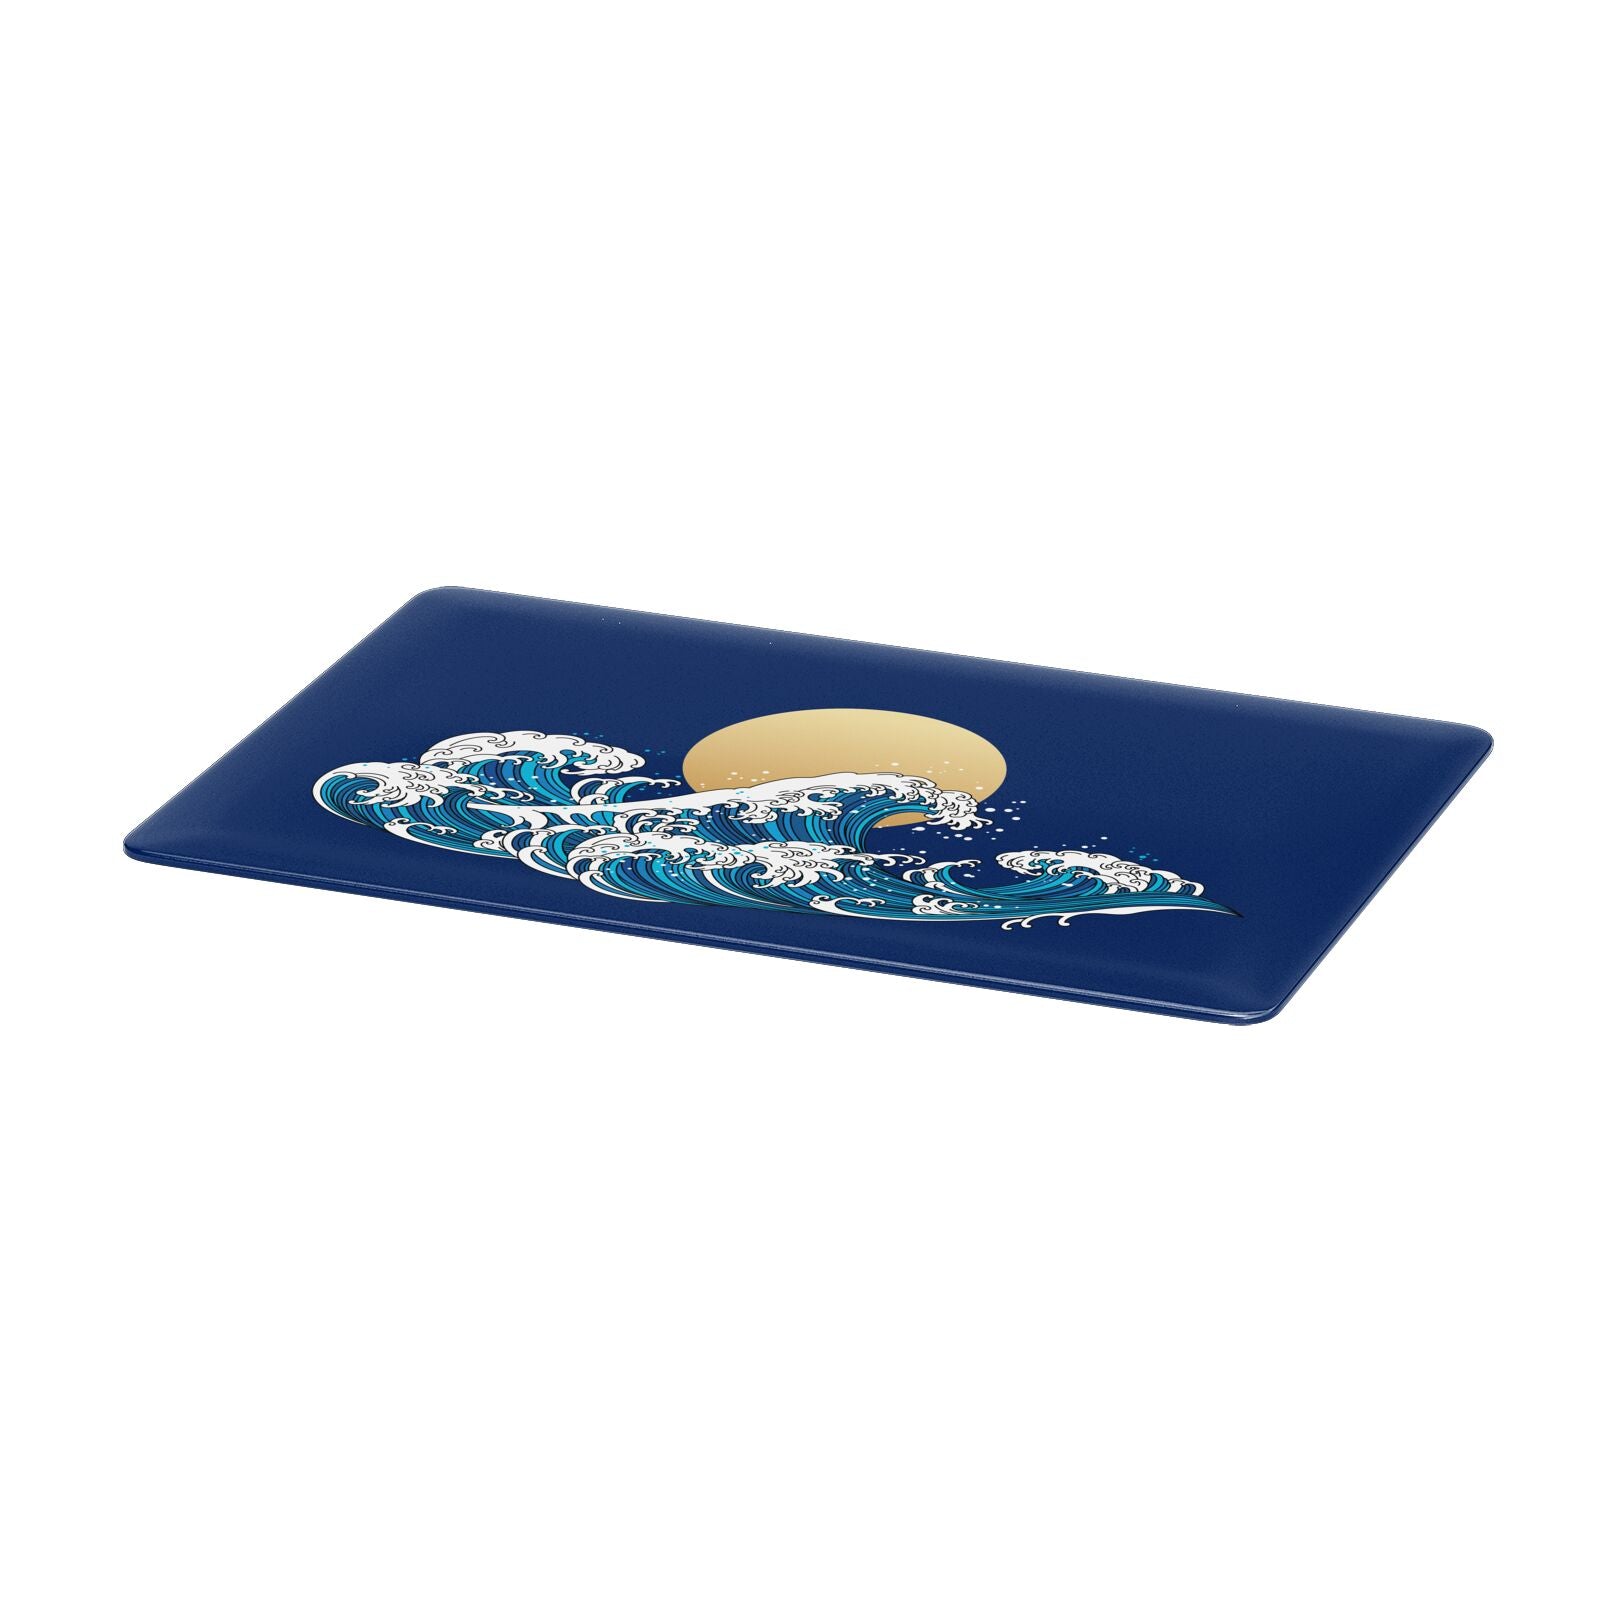 Hokusai Japanese Waves Apple MacBook Case Only